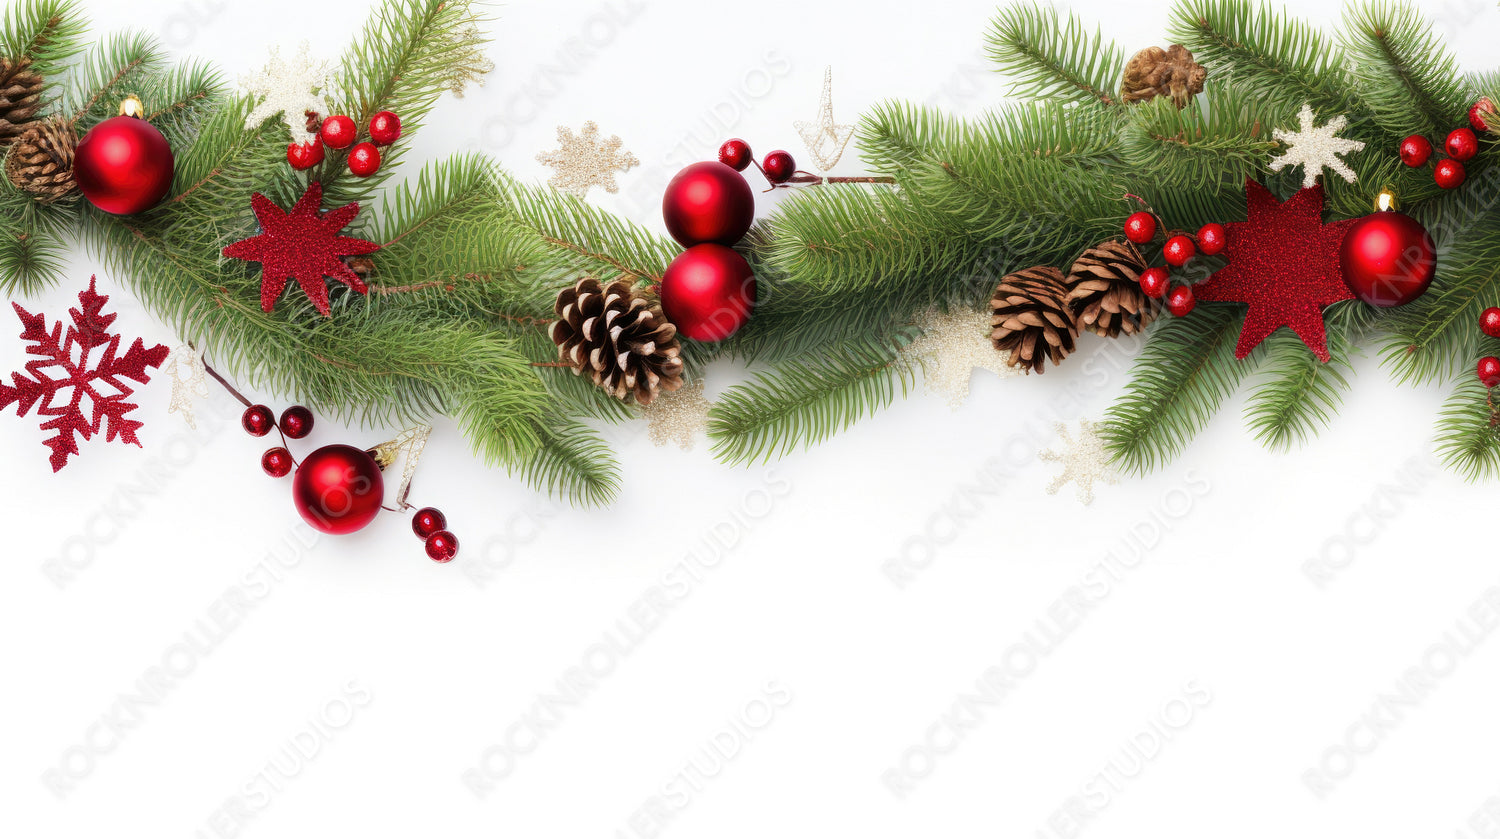 Festive Christmas border, isolated on white background. Fir green branches are decorated with stars, fir cones and red baubels. Close-up, copy space.